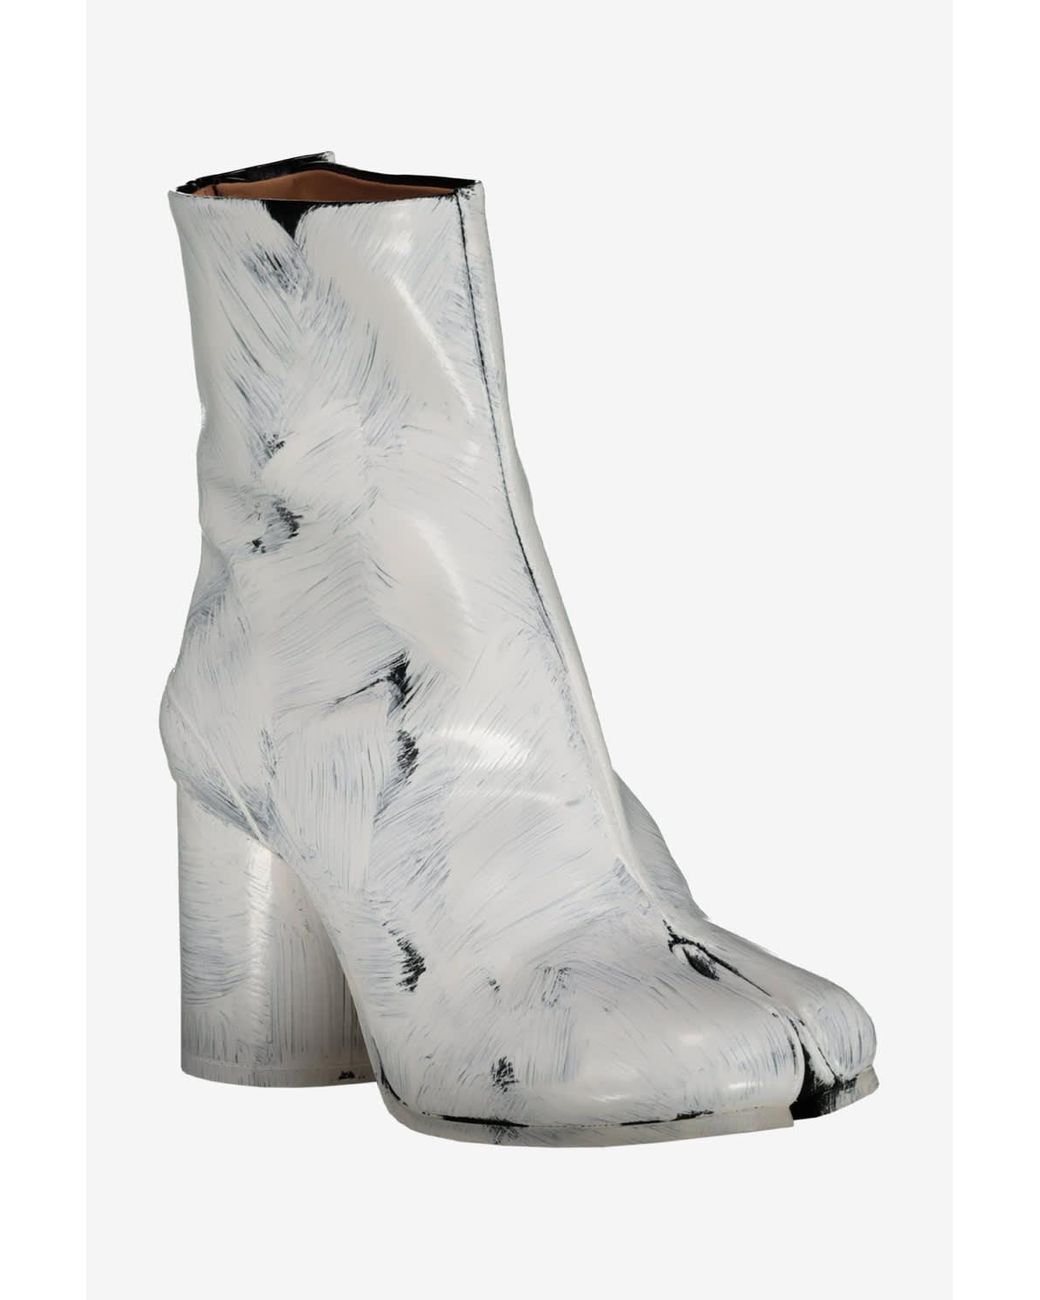 Maison Margiela Iconic White Paint Tabi Boots in Gray | Lyst